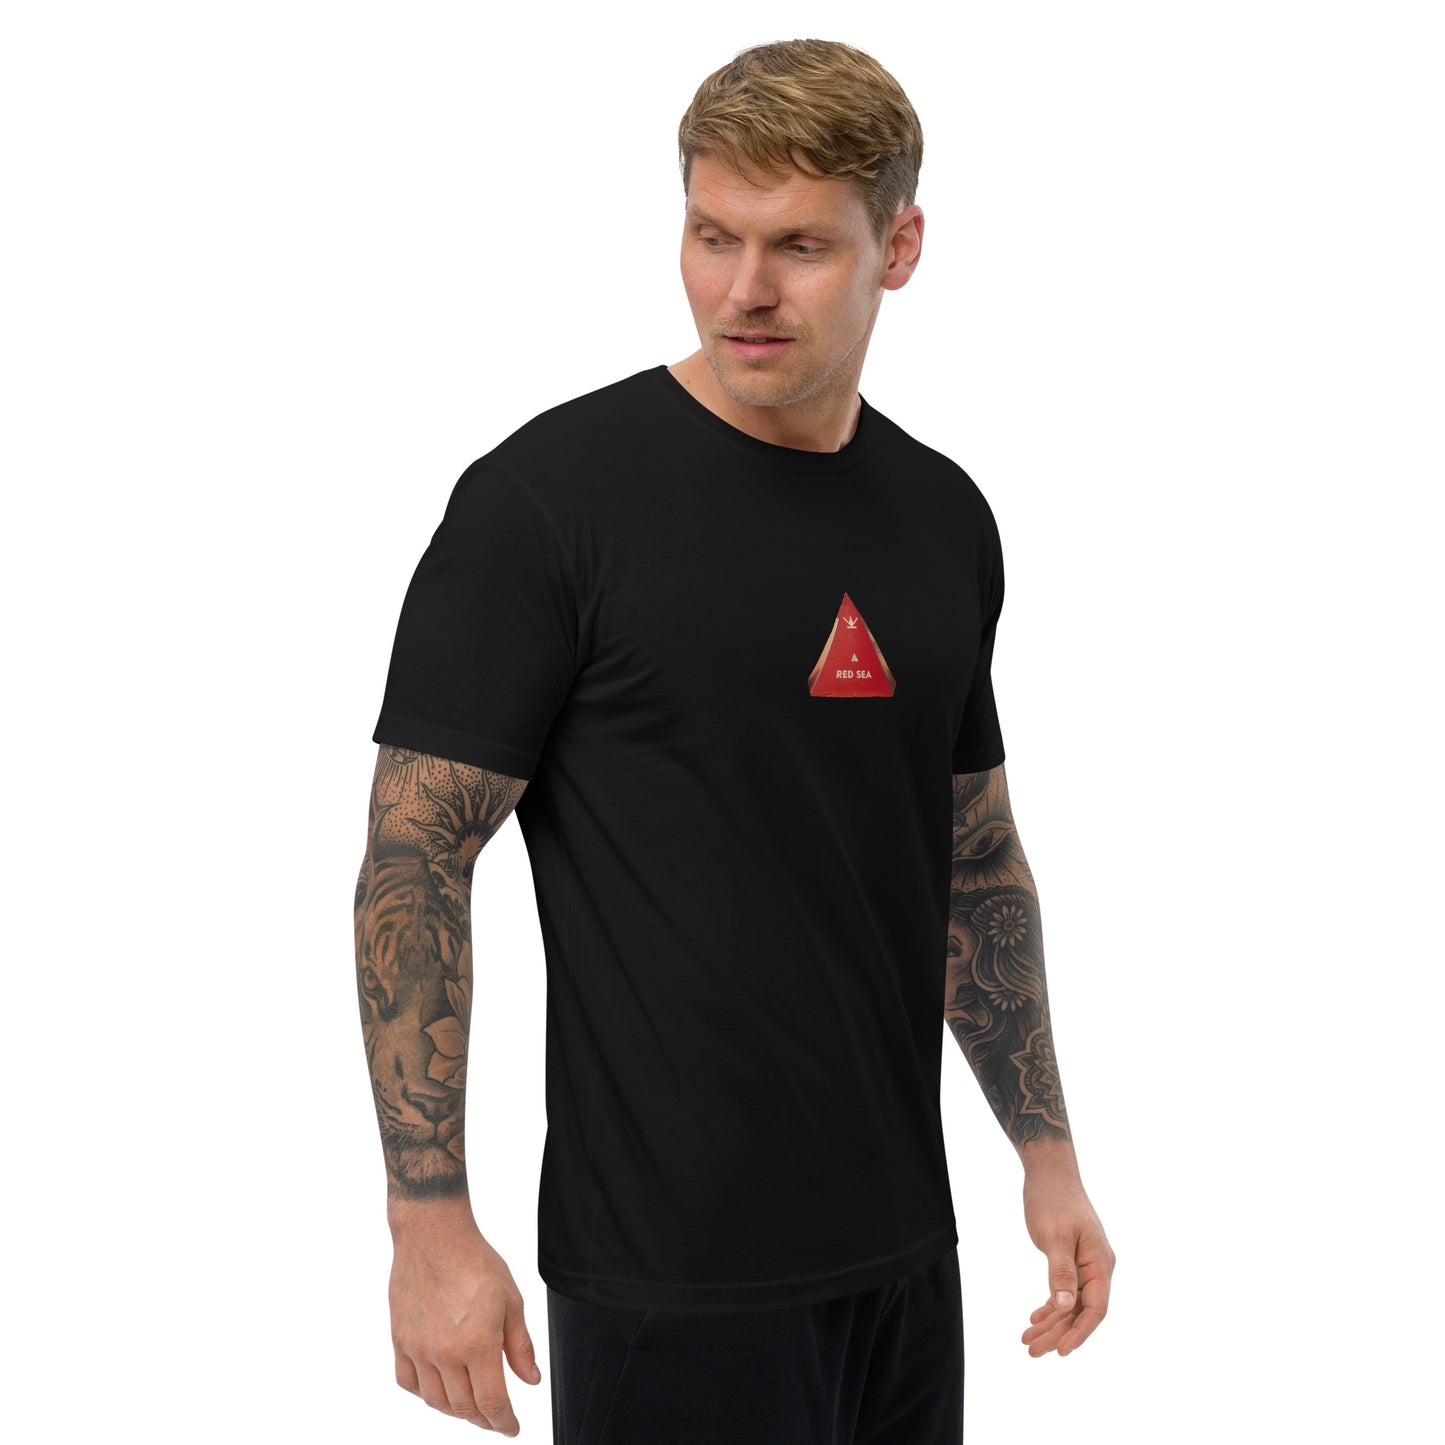 The Red Pyramid T